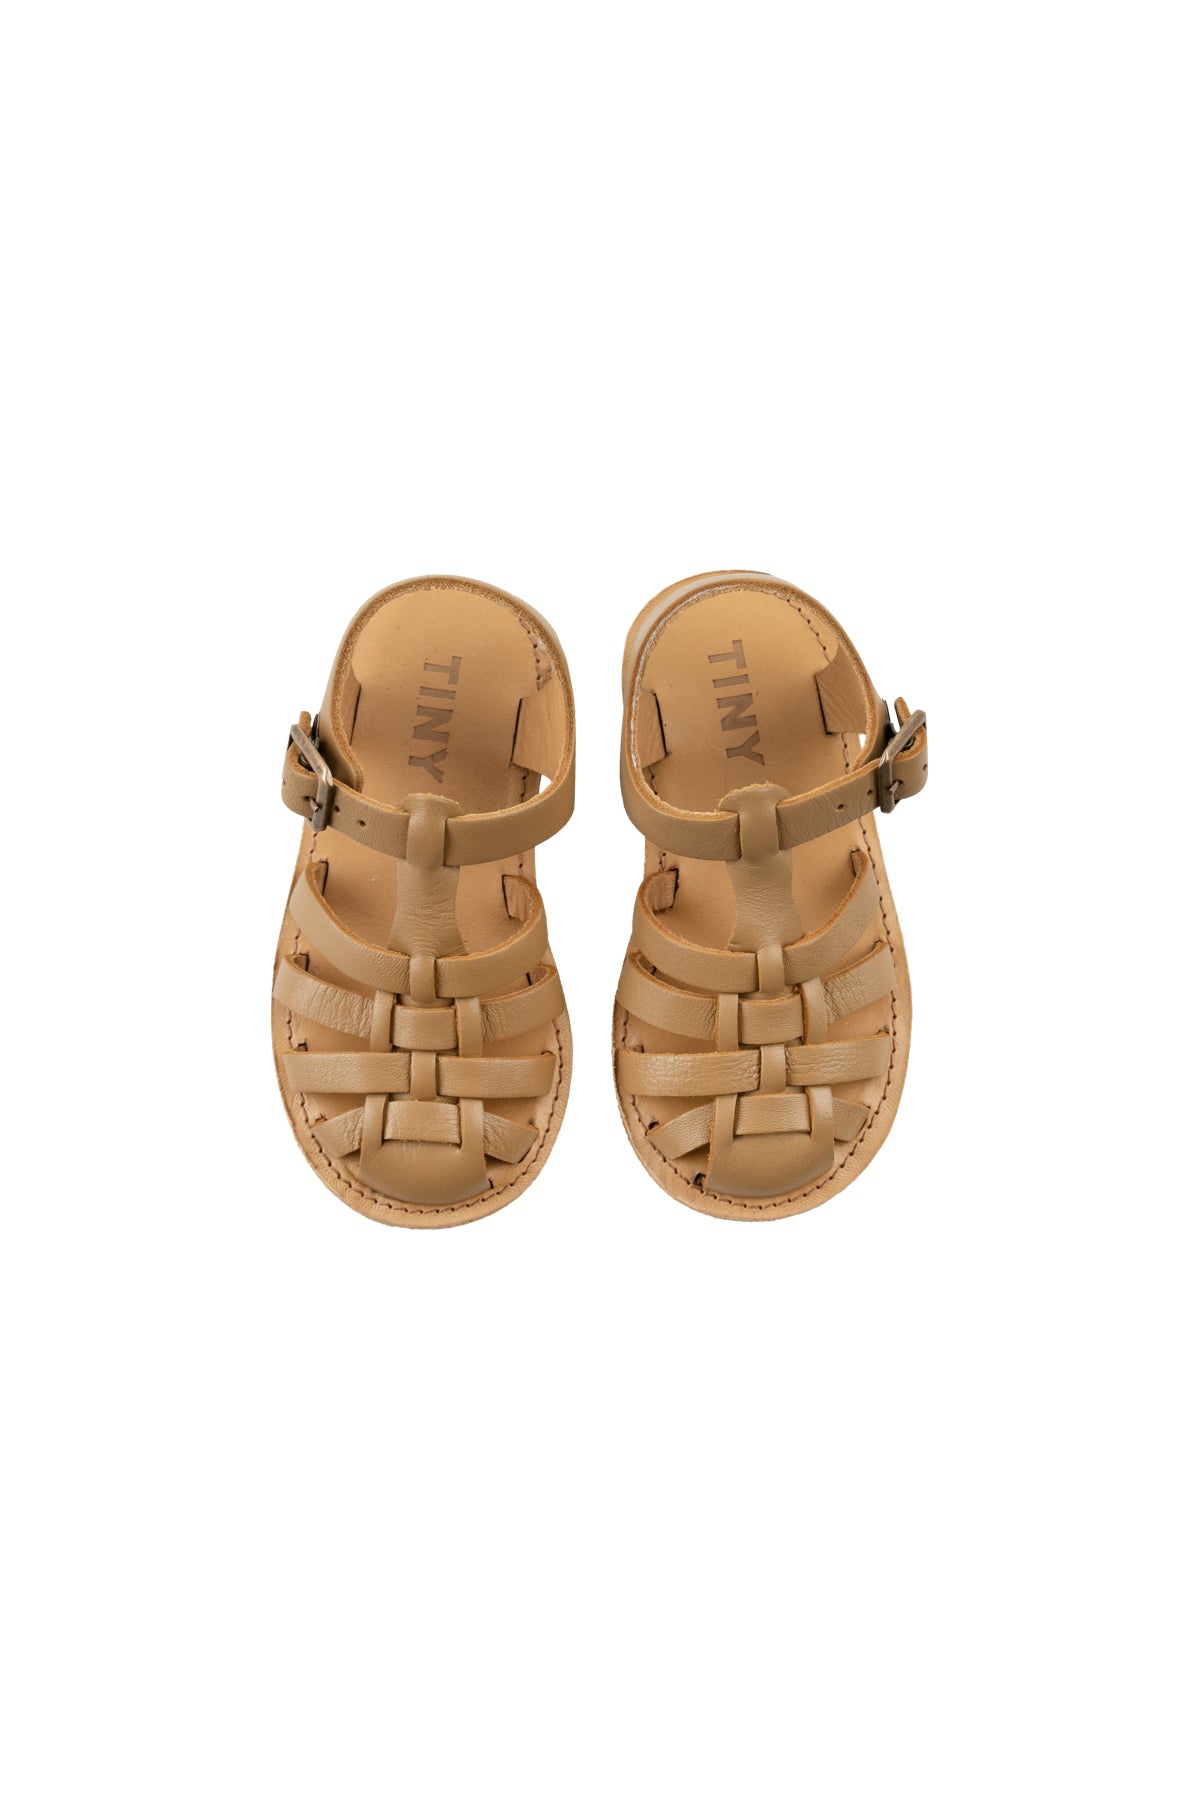 Tiny Cottons Braided Sandals - Sand